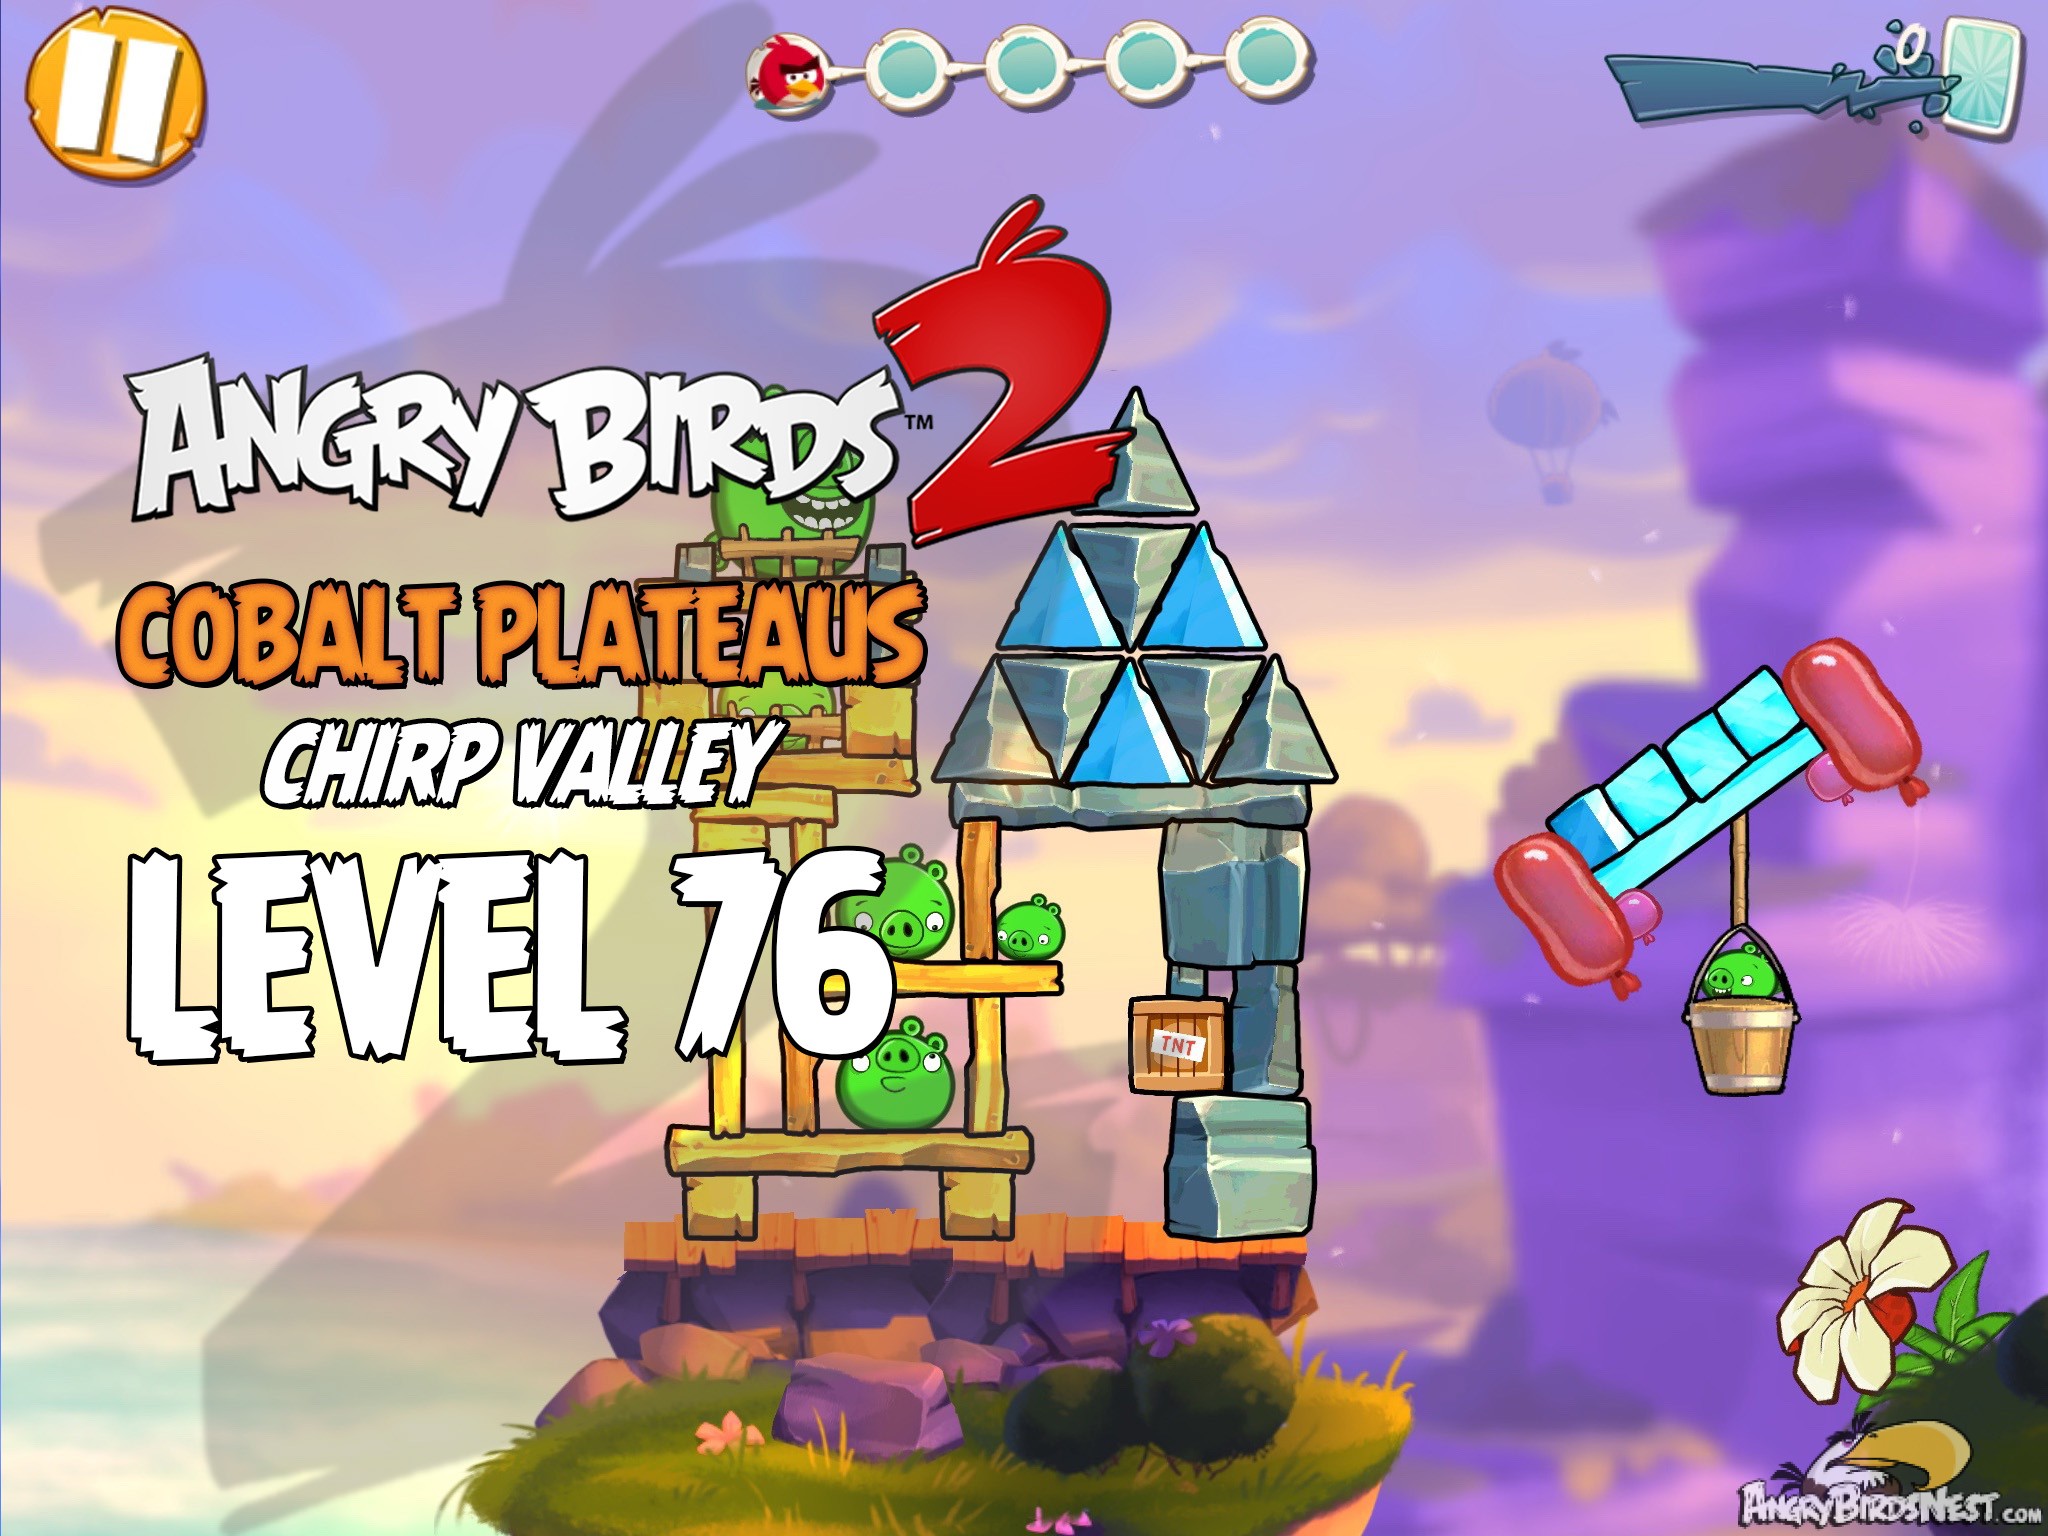 Angry Birds 2 Cobalt Plateaus Chirp Valley Level 76